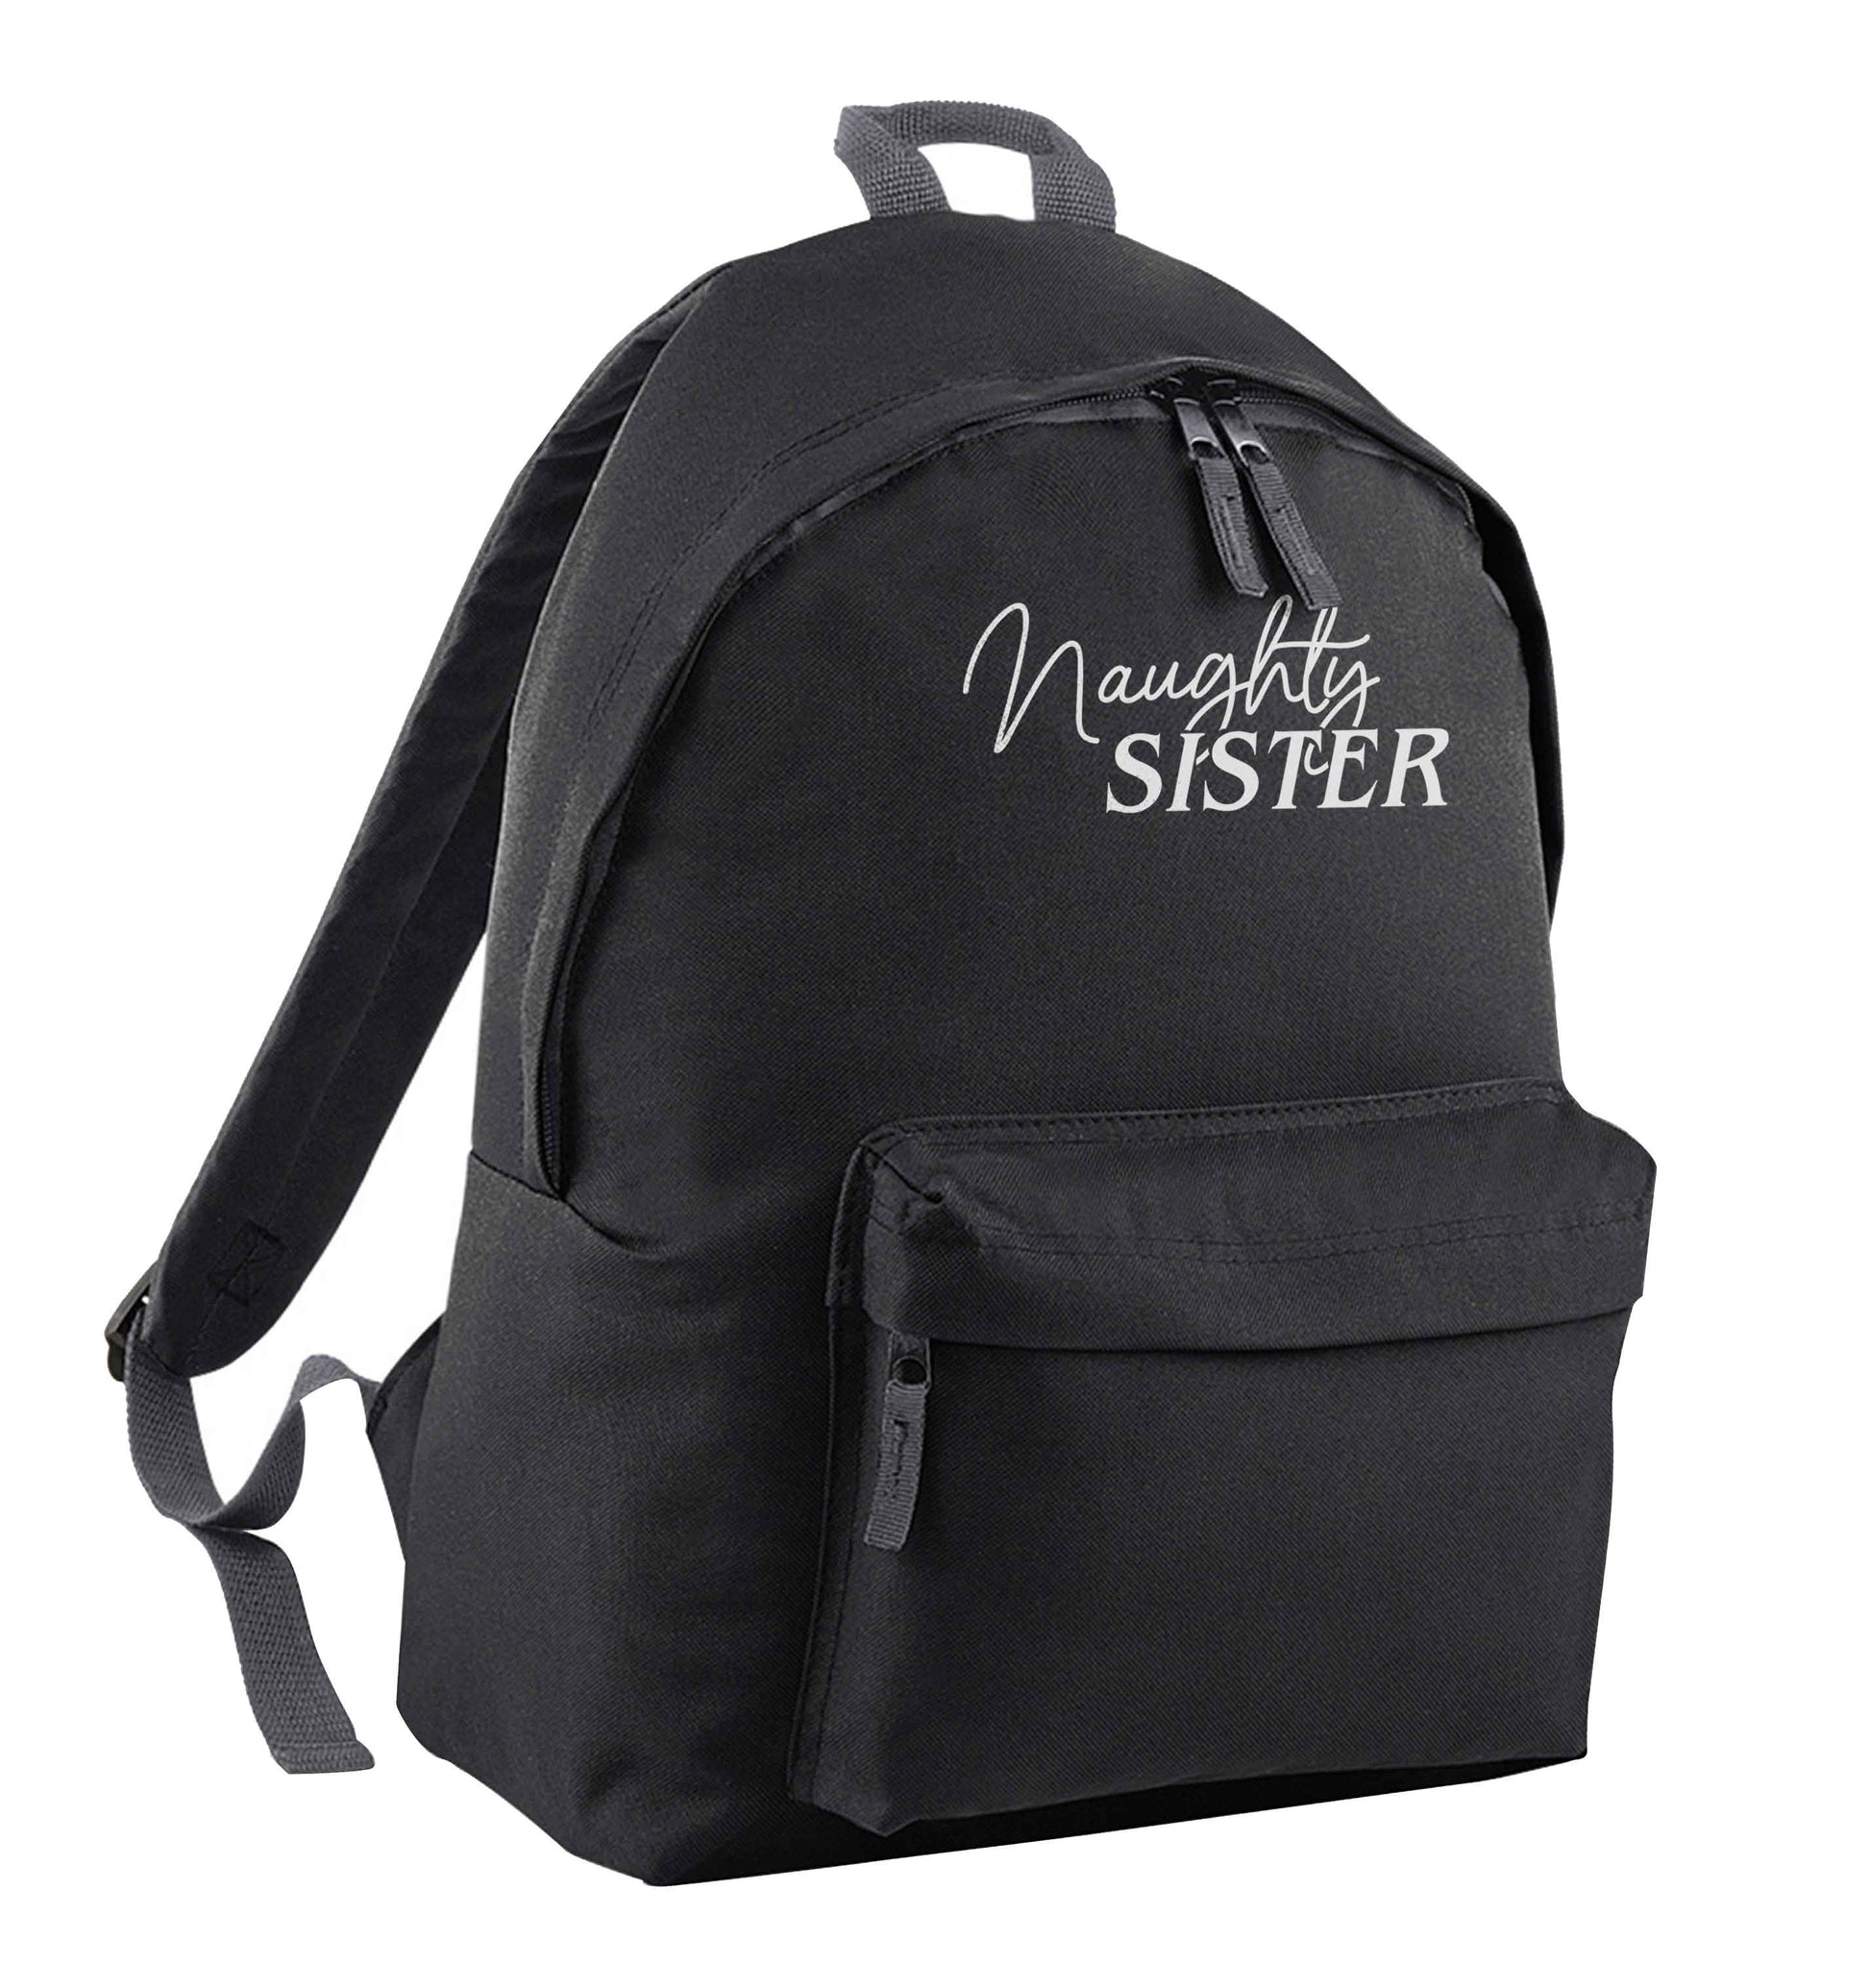 Naughty Sister black adults backpack